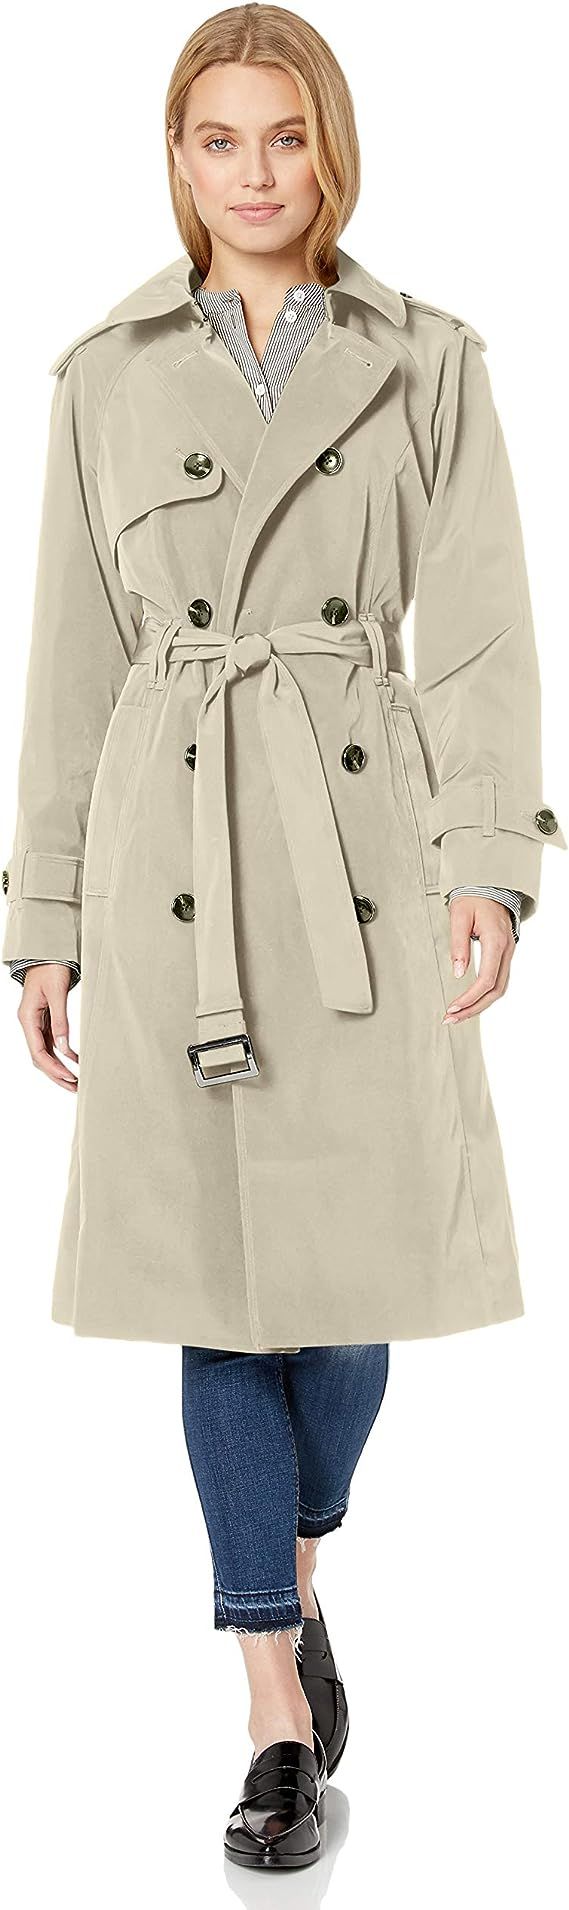 London Fog Women's 3/4 Length Double-Breasted Trench Coat with Belt       Send to Logie | Amazon (US)